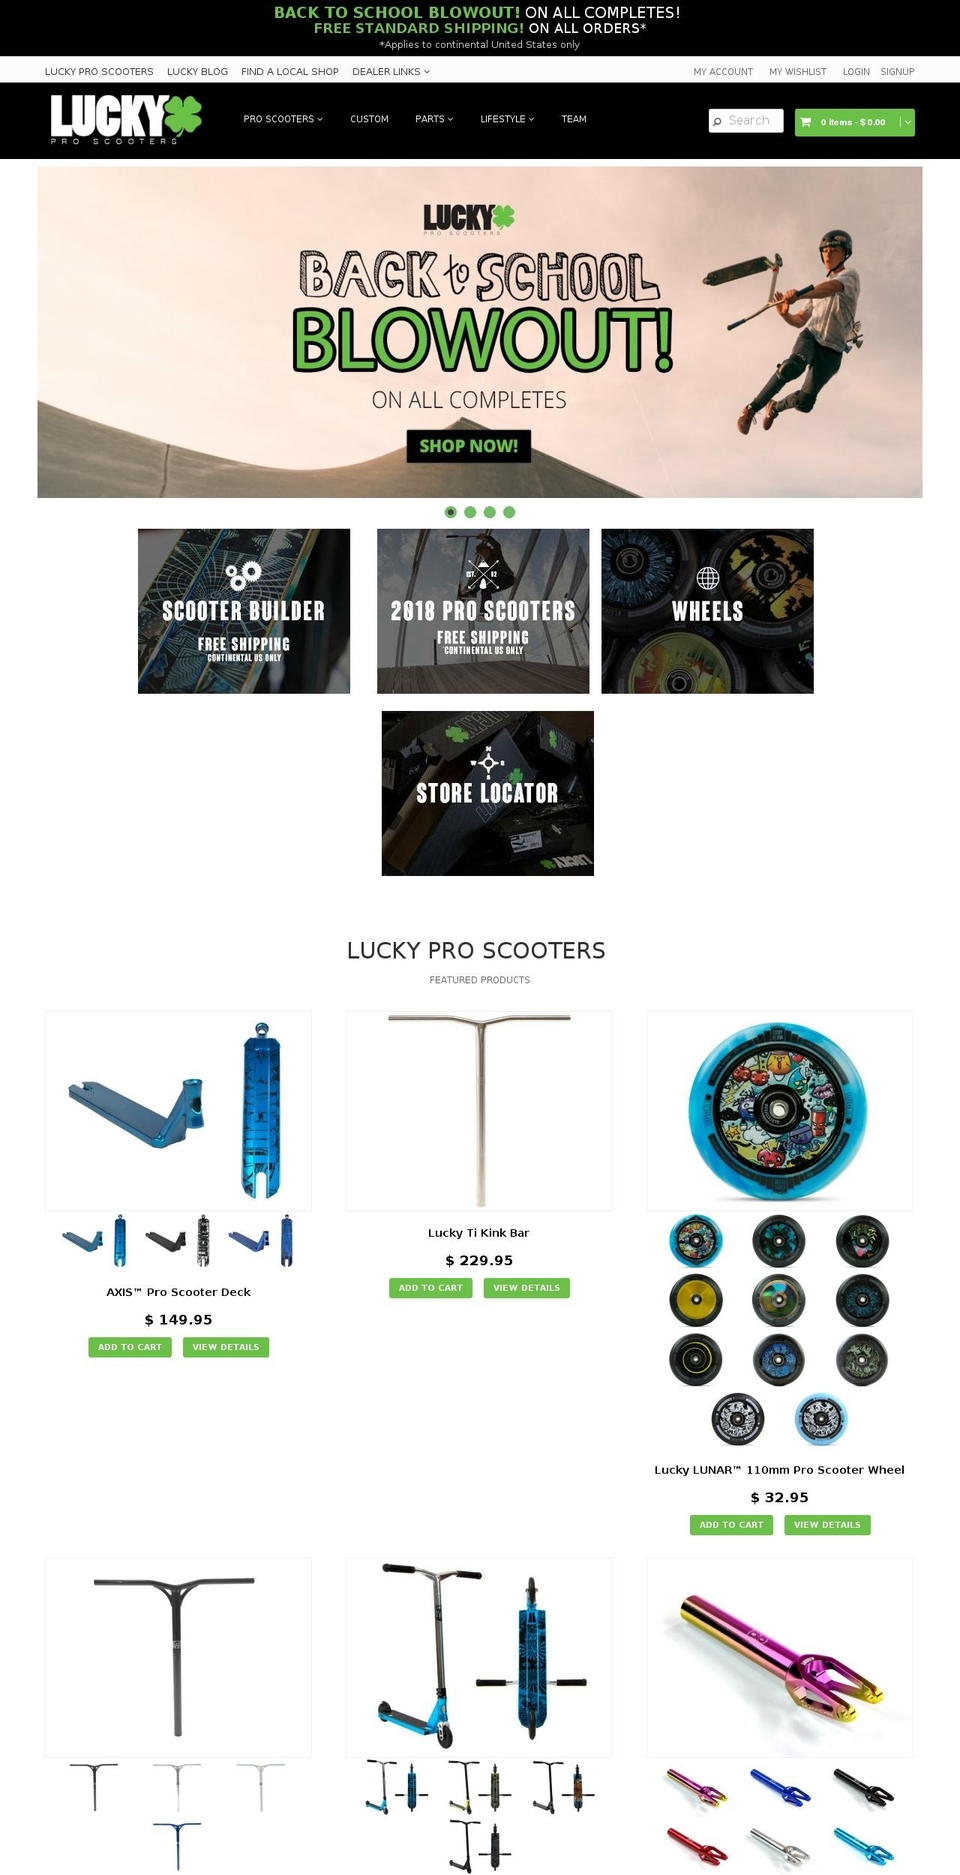 Lucky Scooters Live Theme 2-17-2017 Shopify theme site example luckyscoot.us